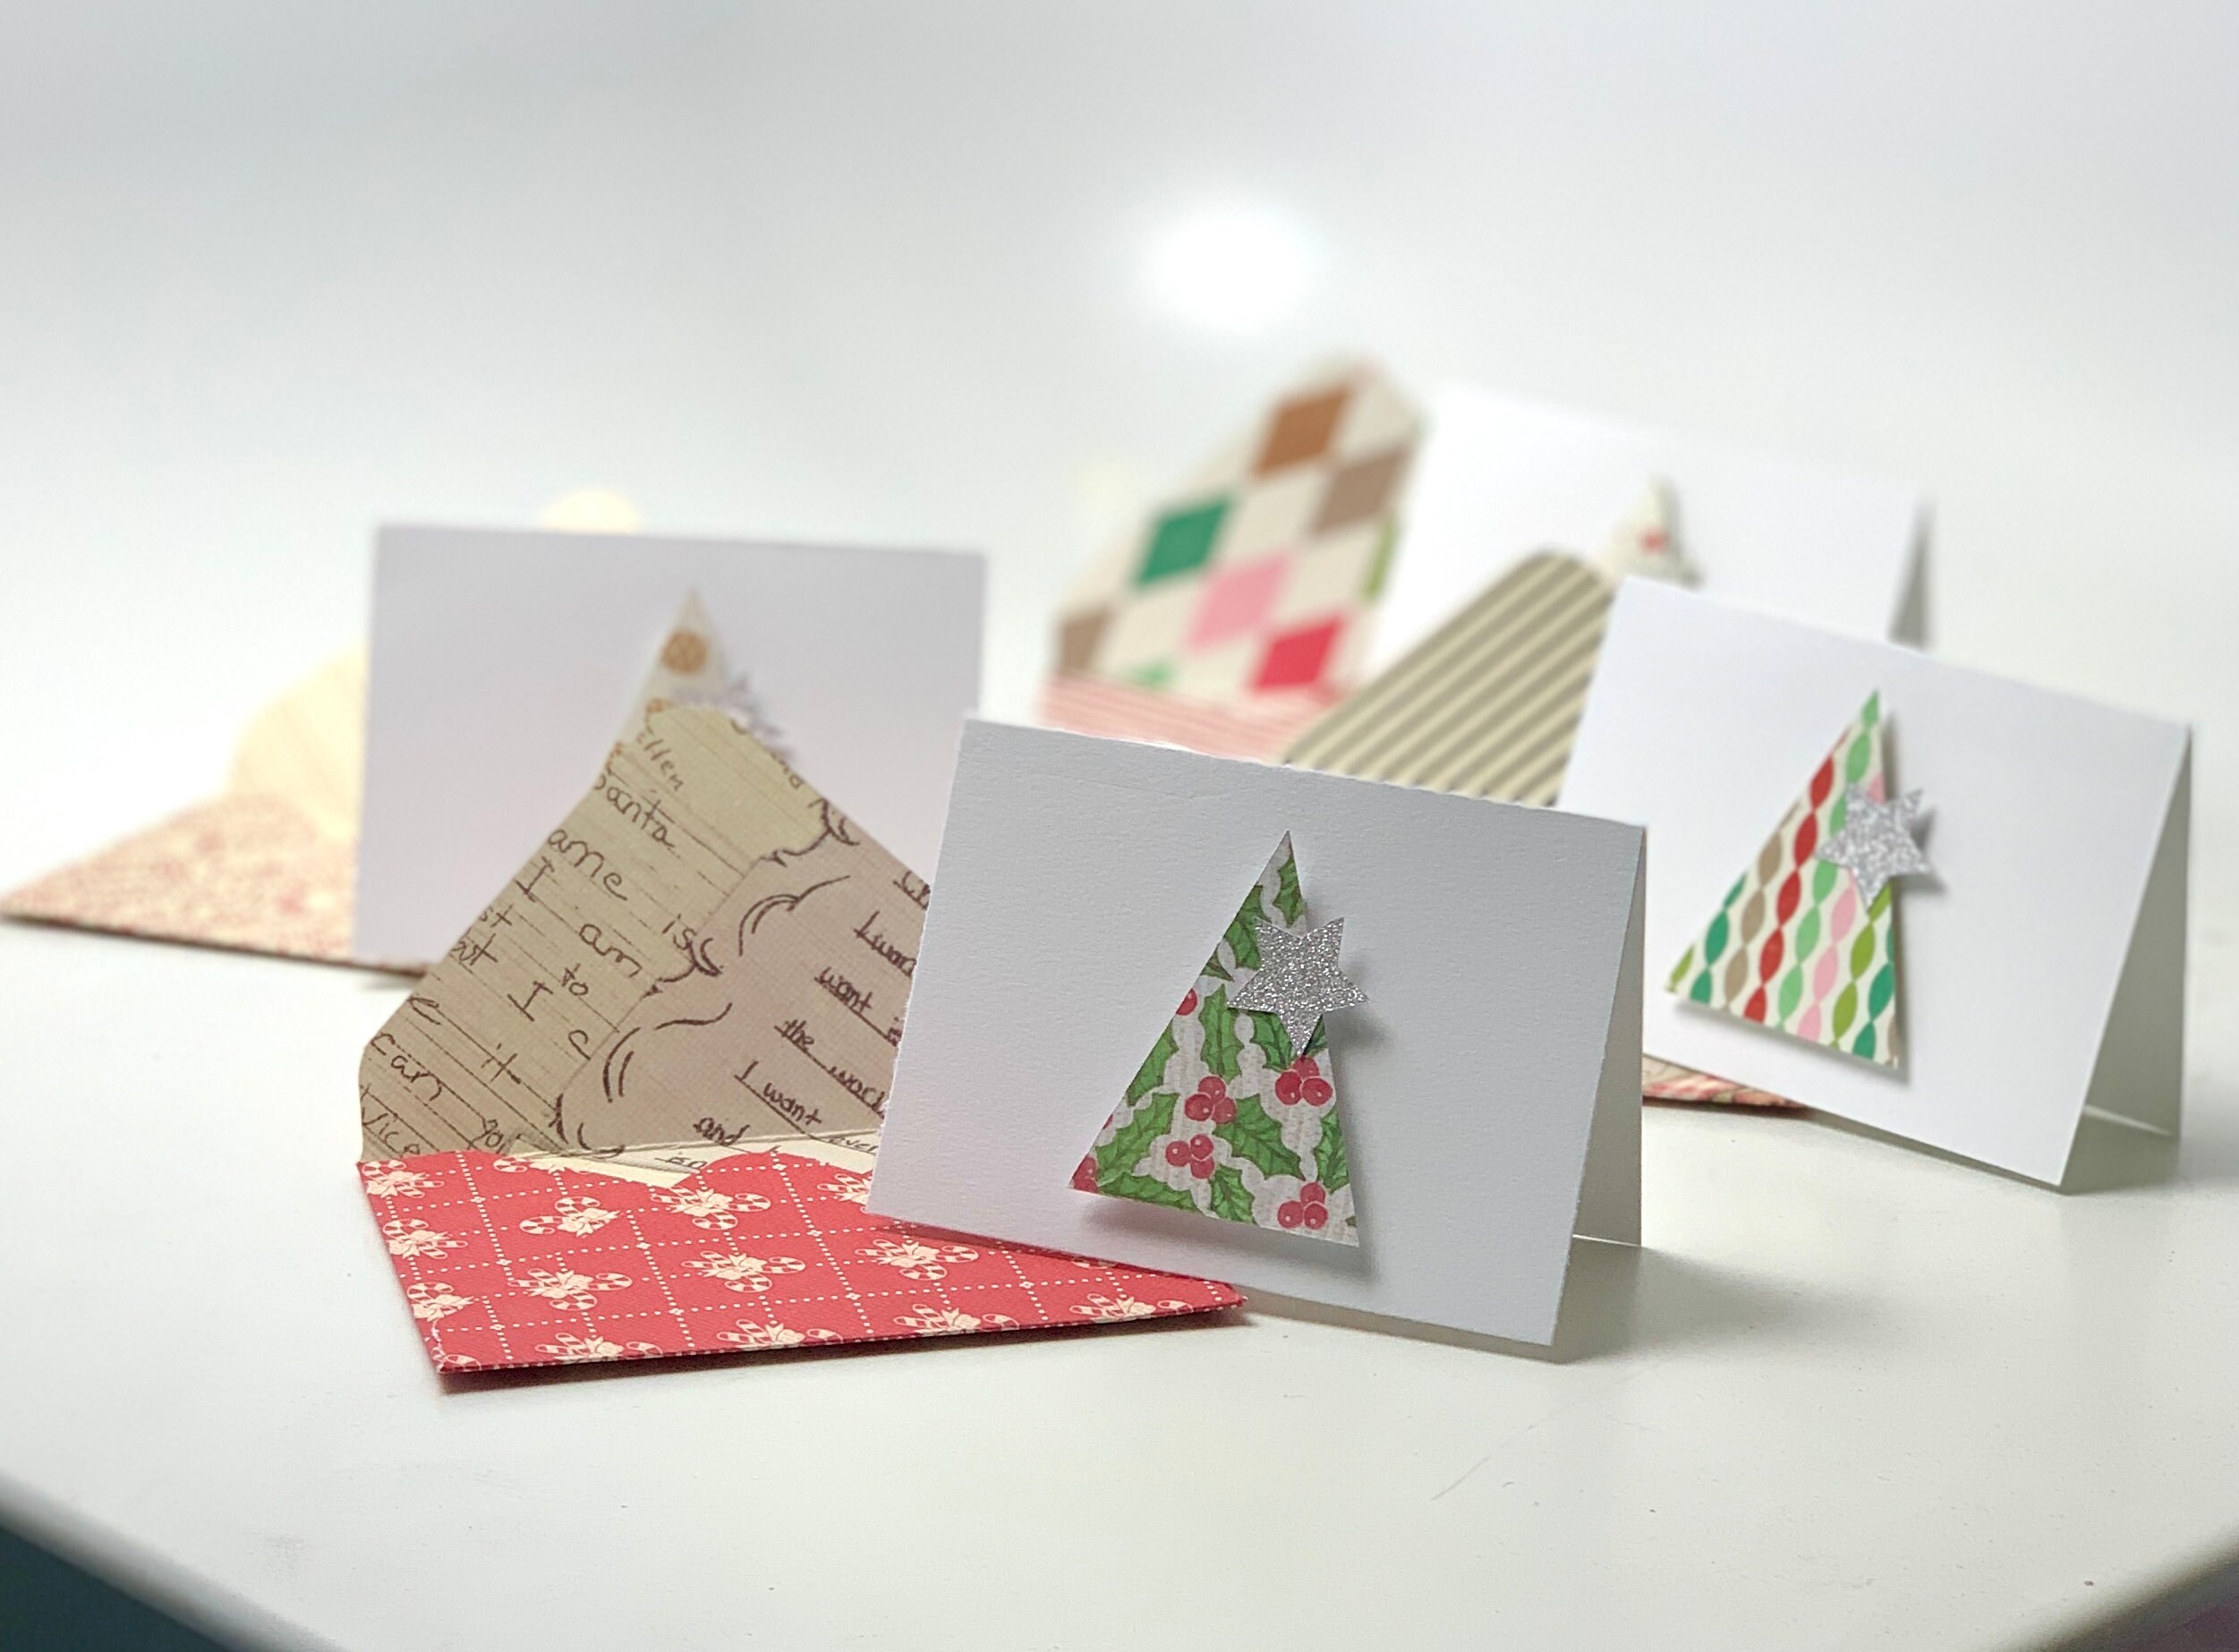 Assorted Mini Note Cards, 3 X 3, Blank Cards, Gift Enclosure, Set